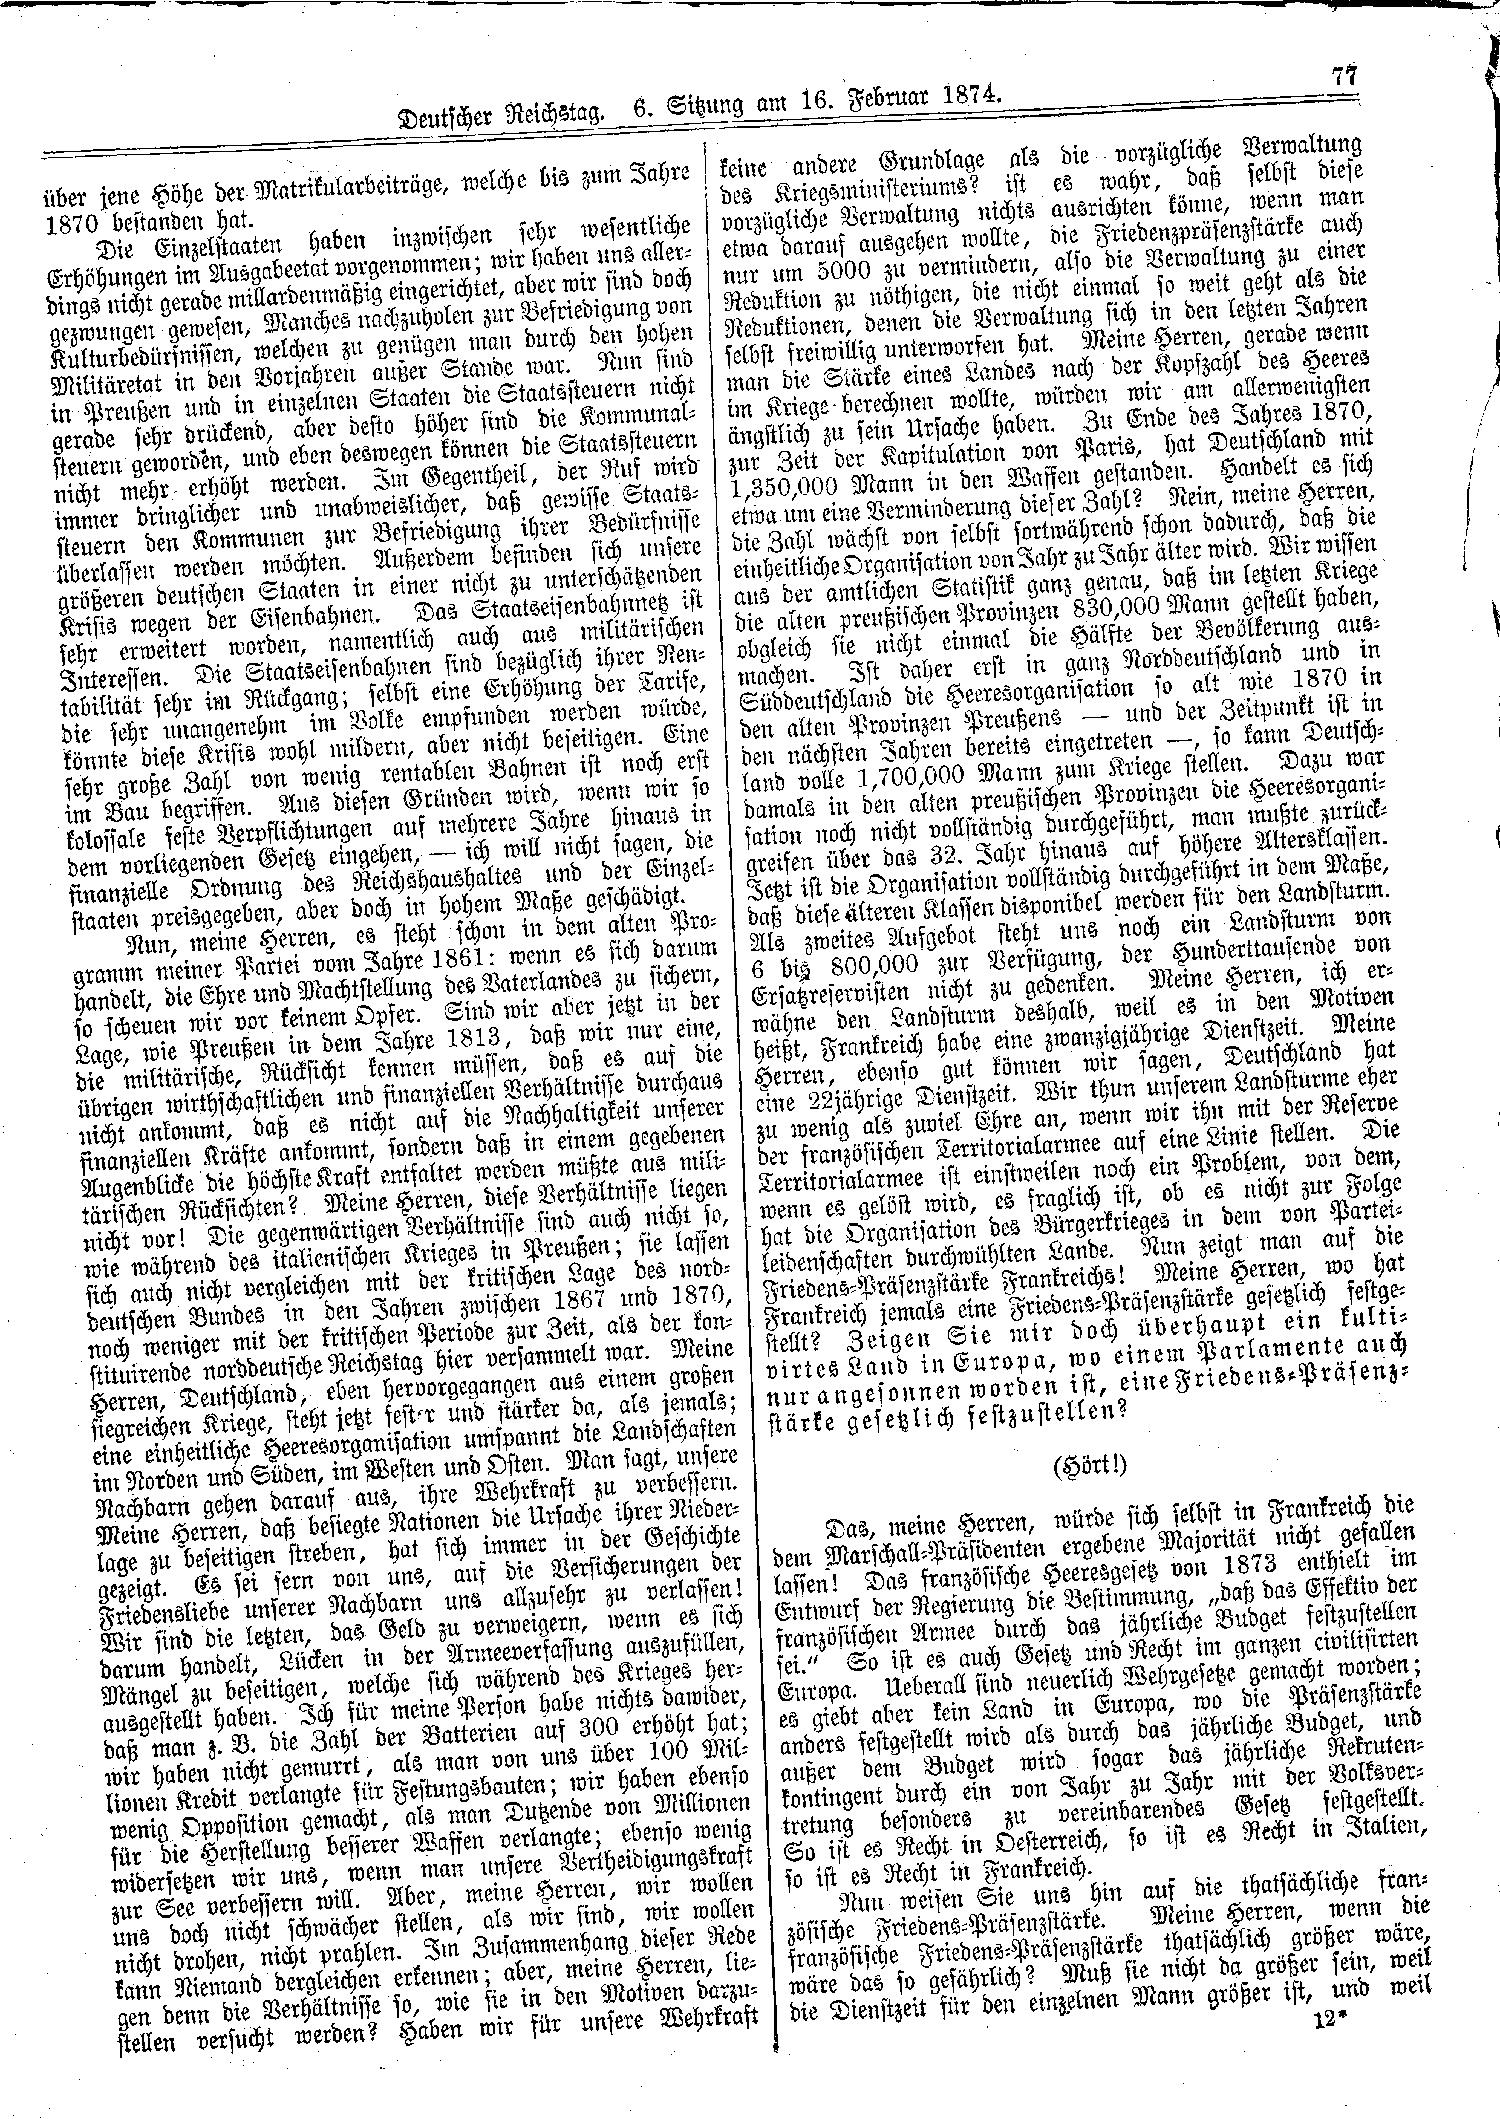 Scan of page 77